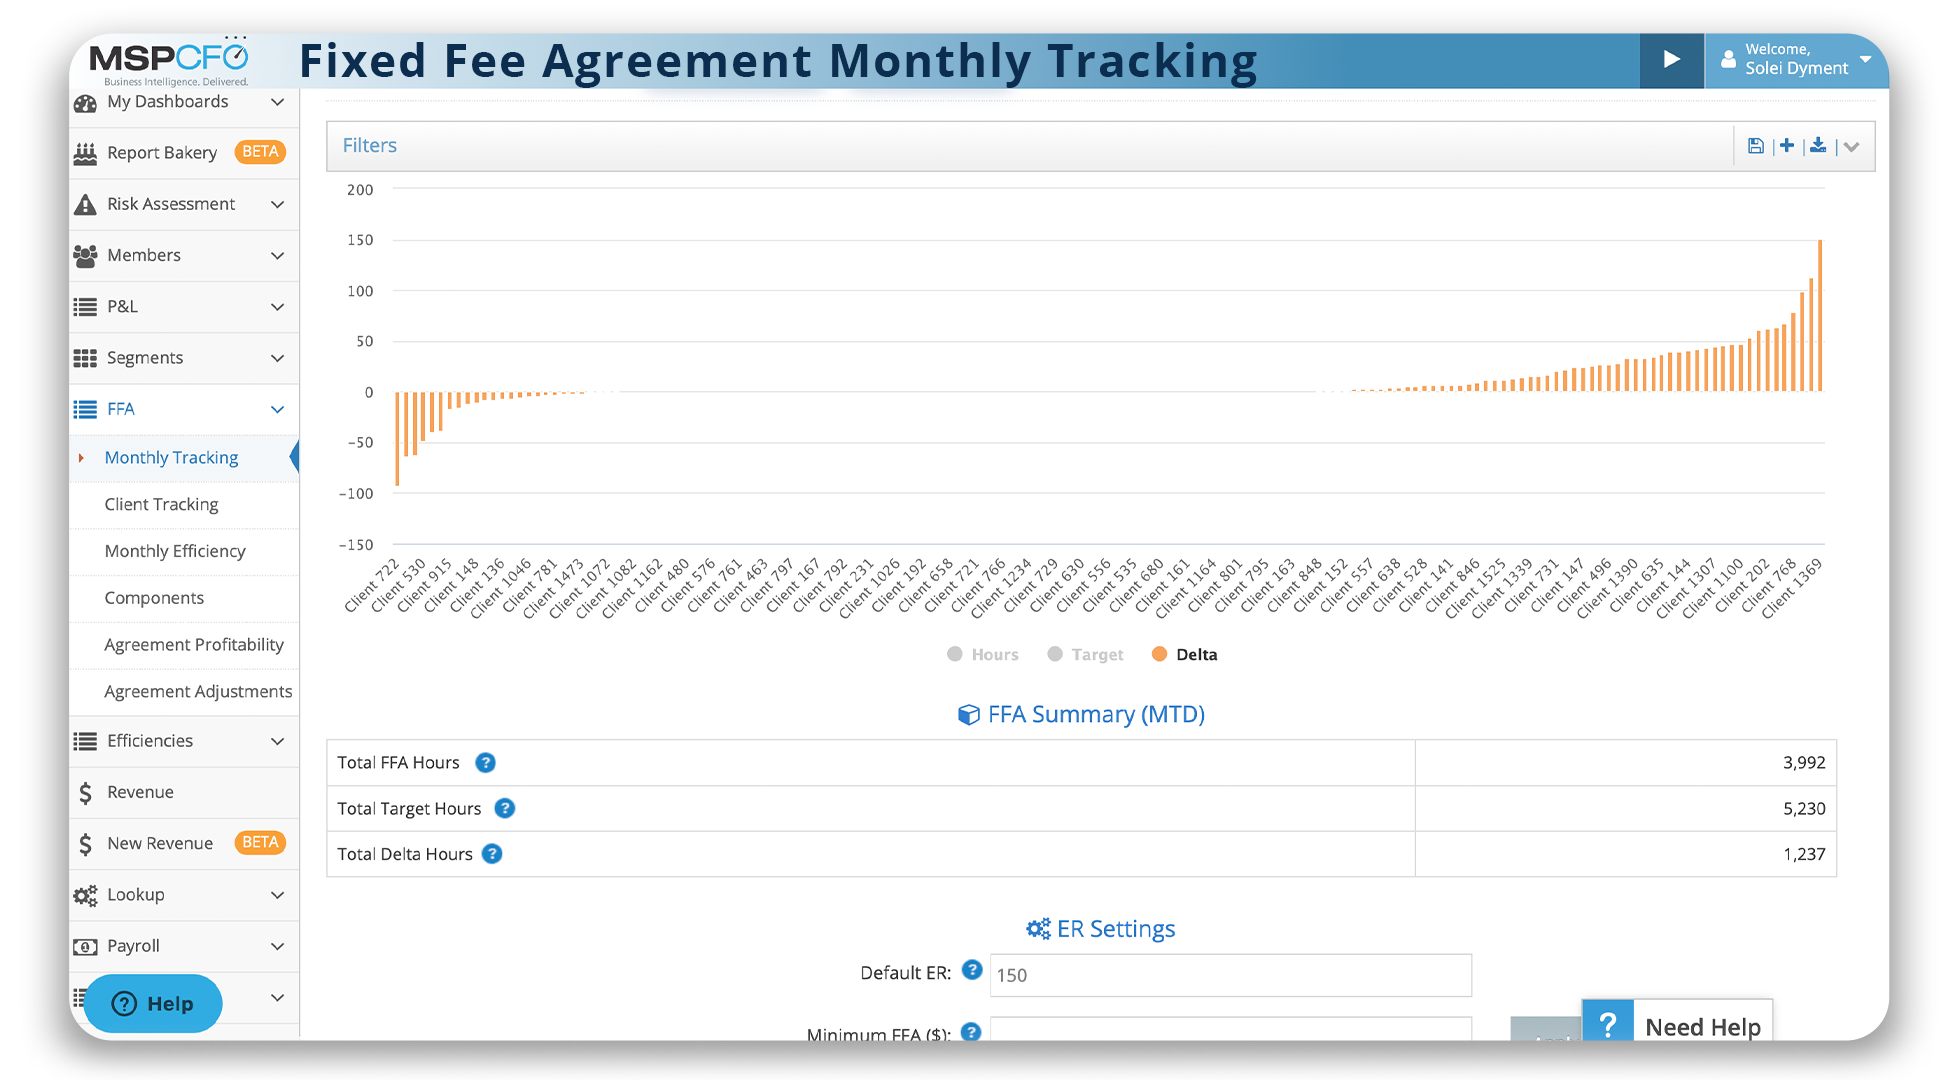 Fixed Fee Agreement Monthly Tracking